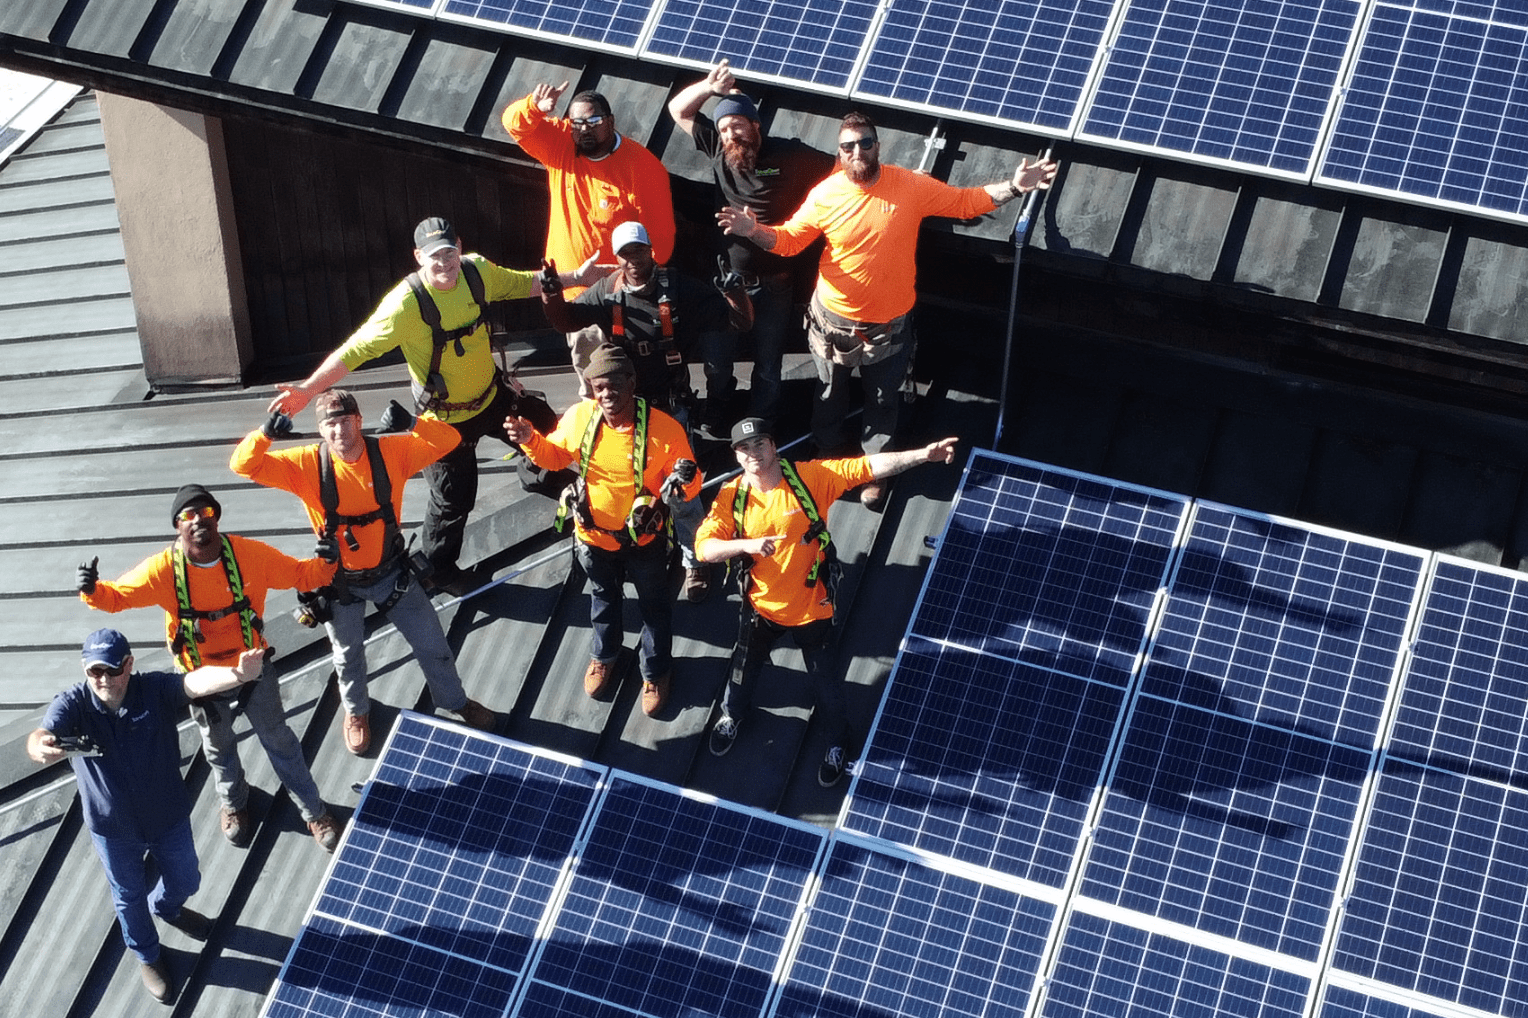 solar installers on roof